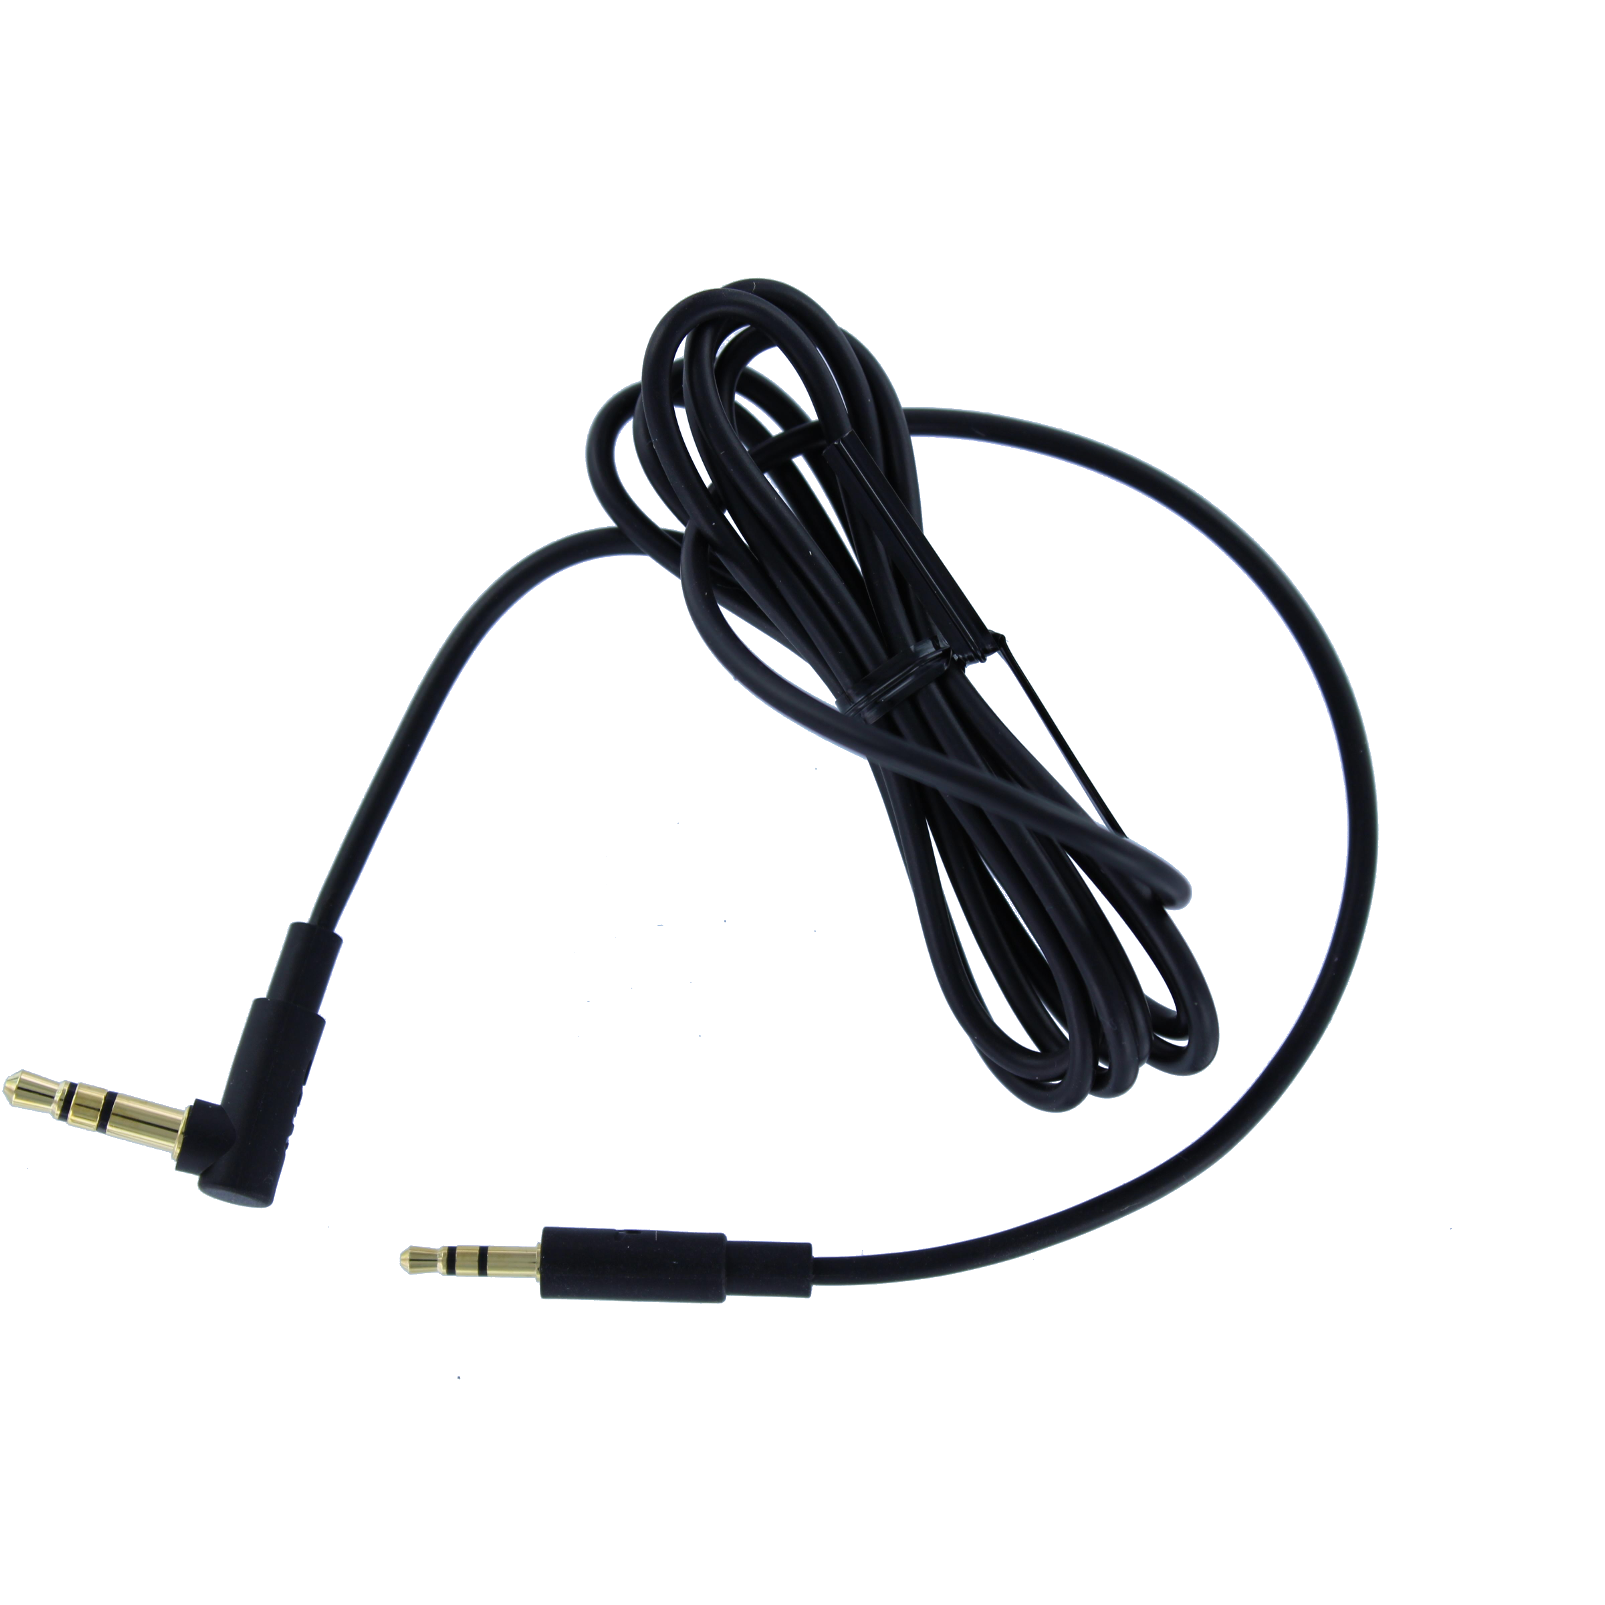 AKG Audio cable for N700NC - Black - Audio cable - Hero